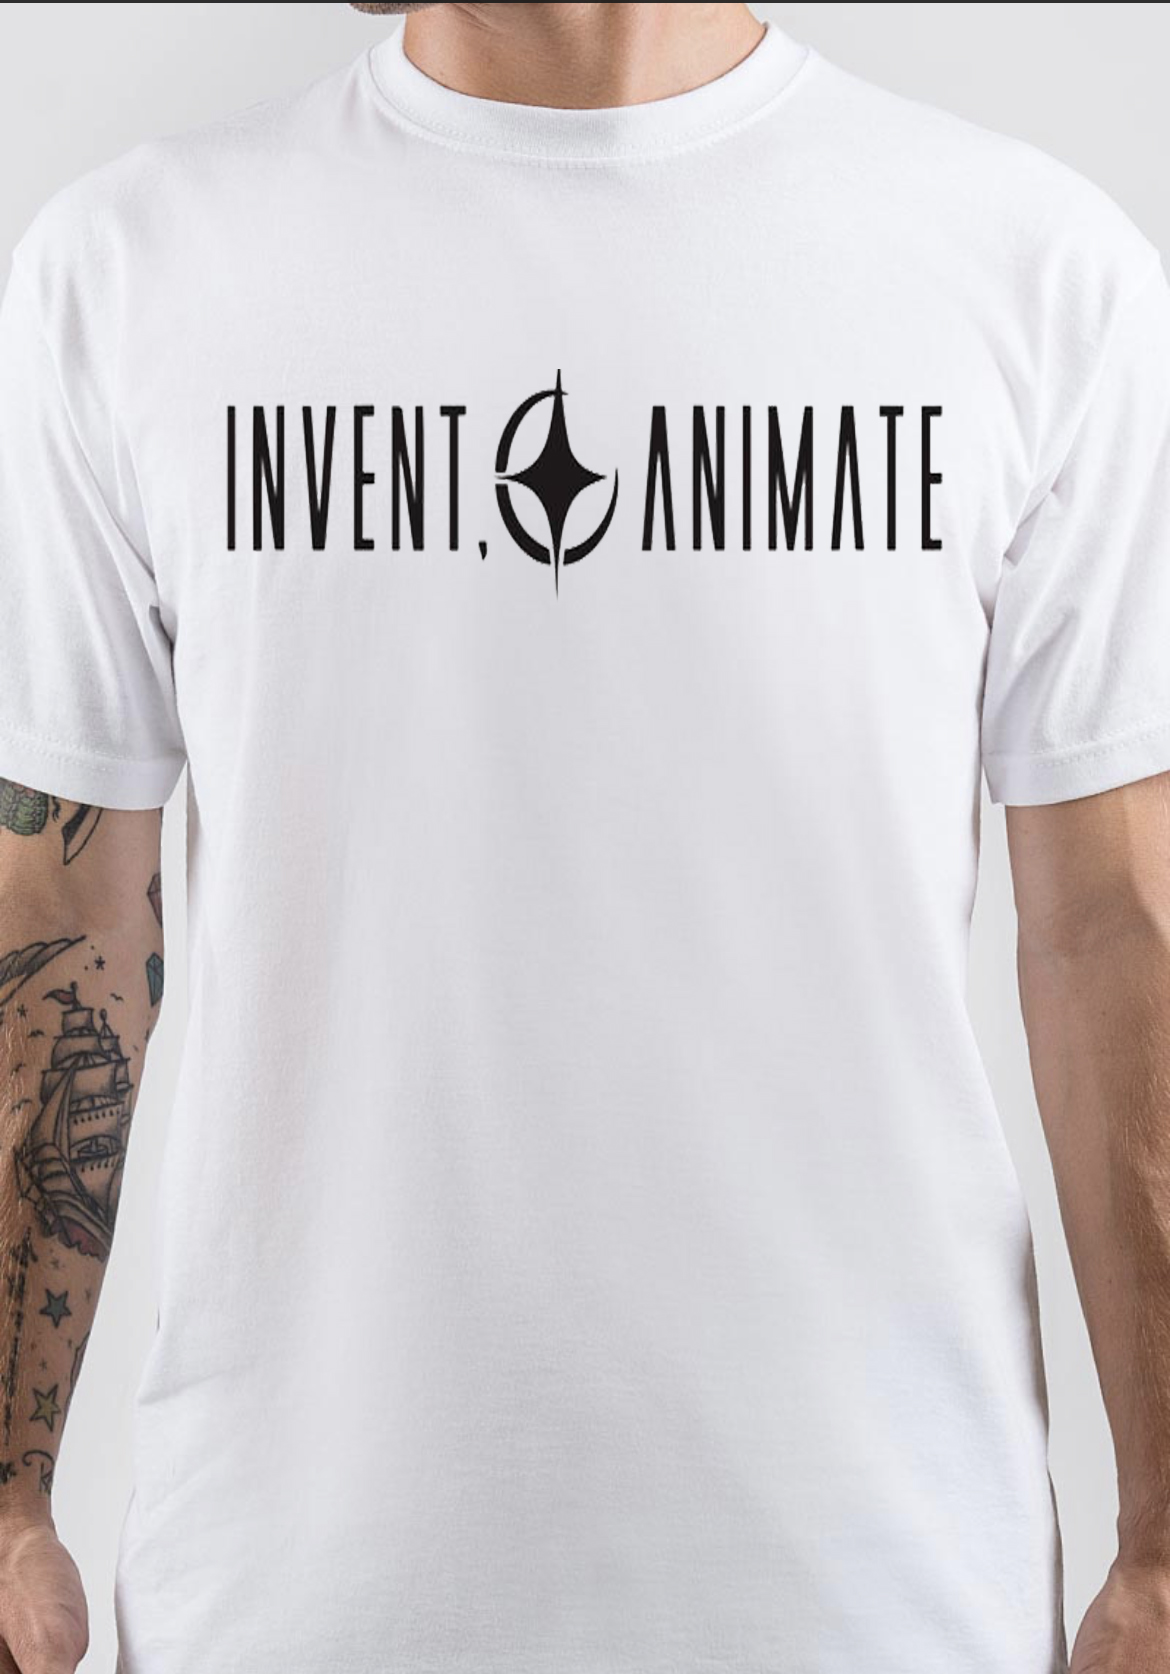 Invent Animate T-Shirt And Merchandise